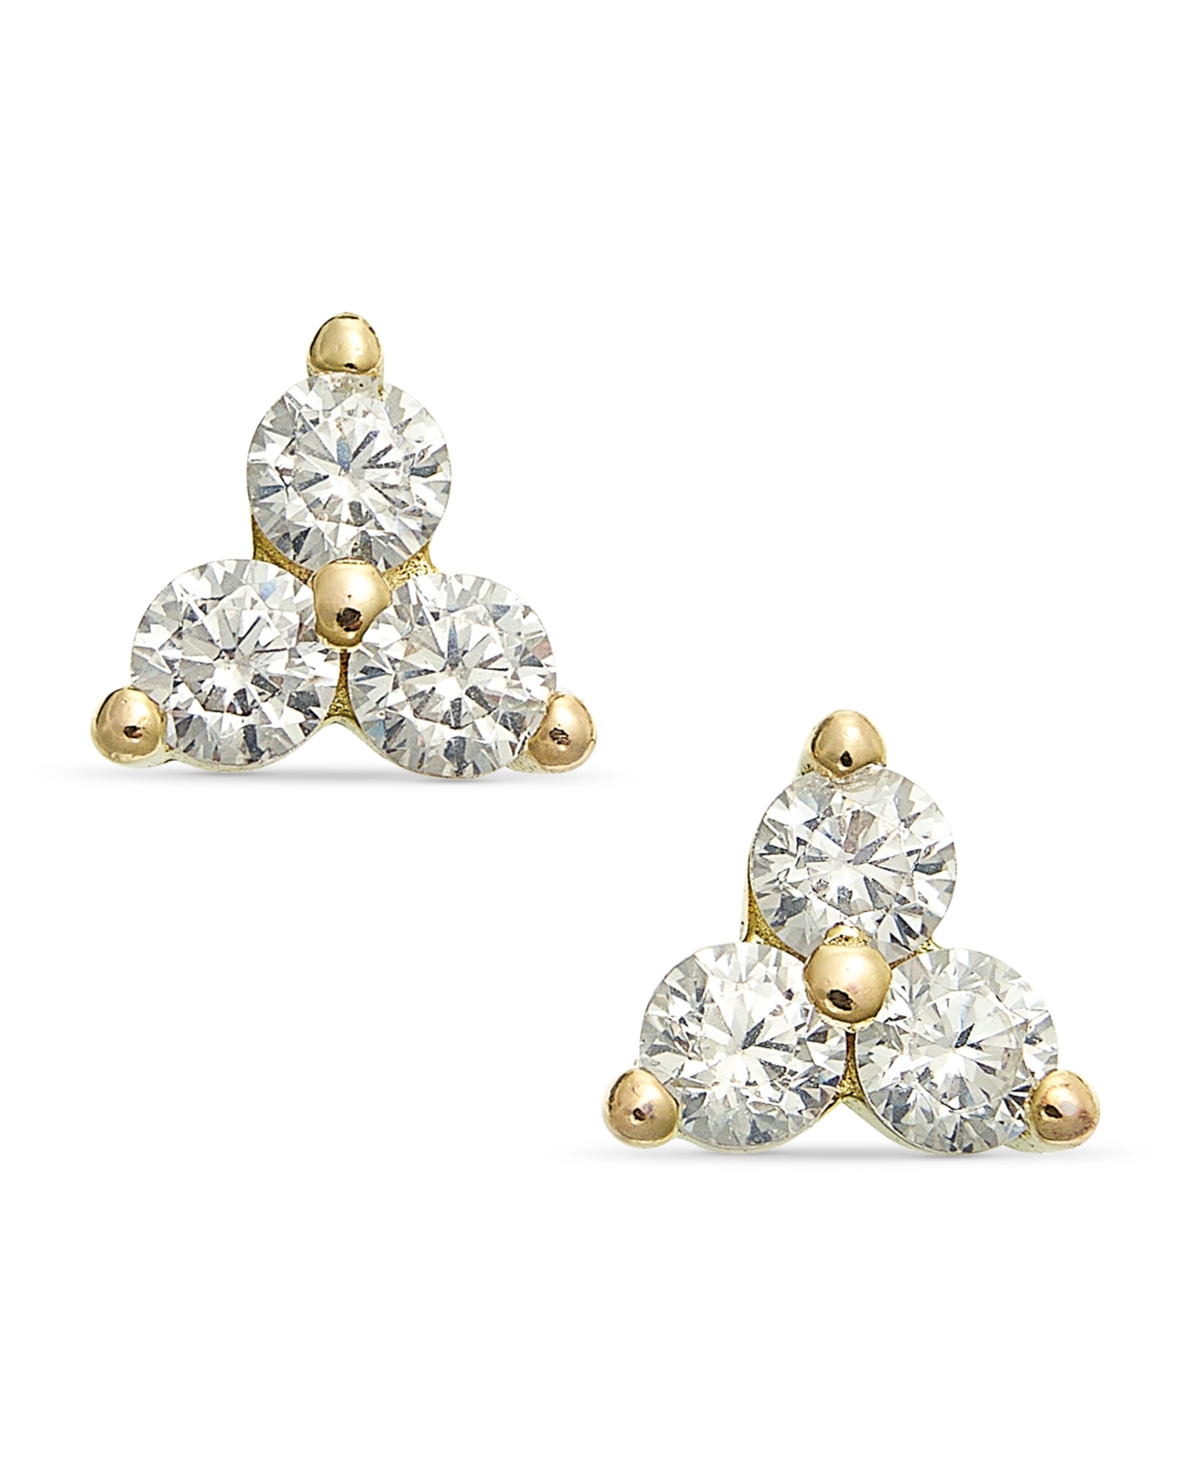 Lola Ade 18k Gold-plated Sterling Silver Cubic Zirconia Trinity Stud Earrings